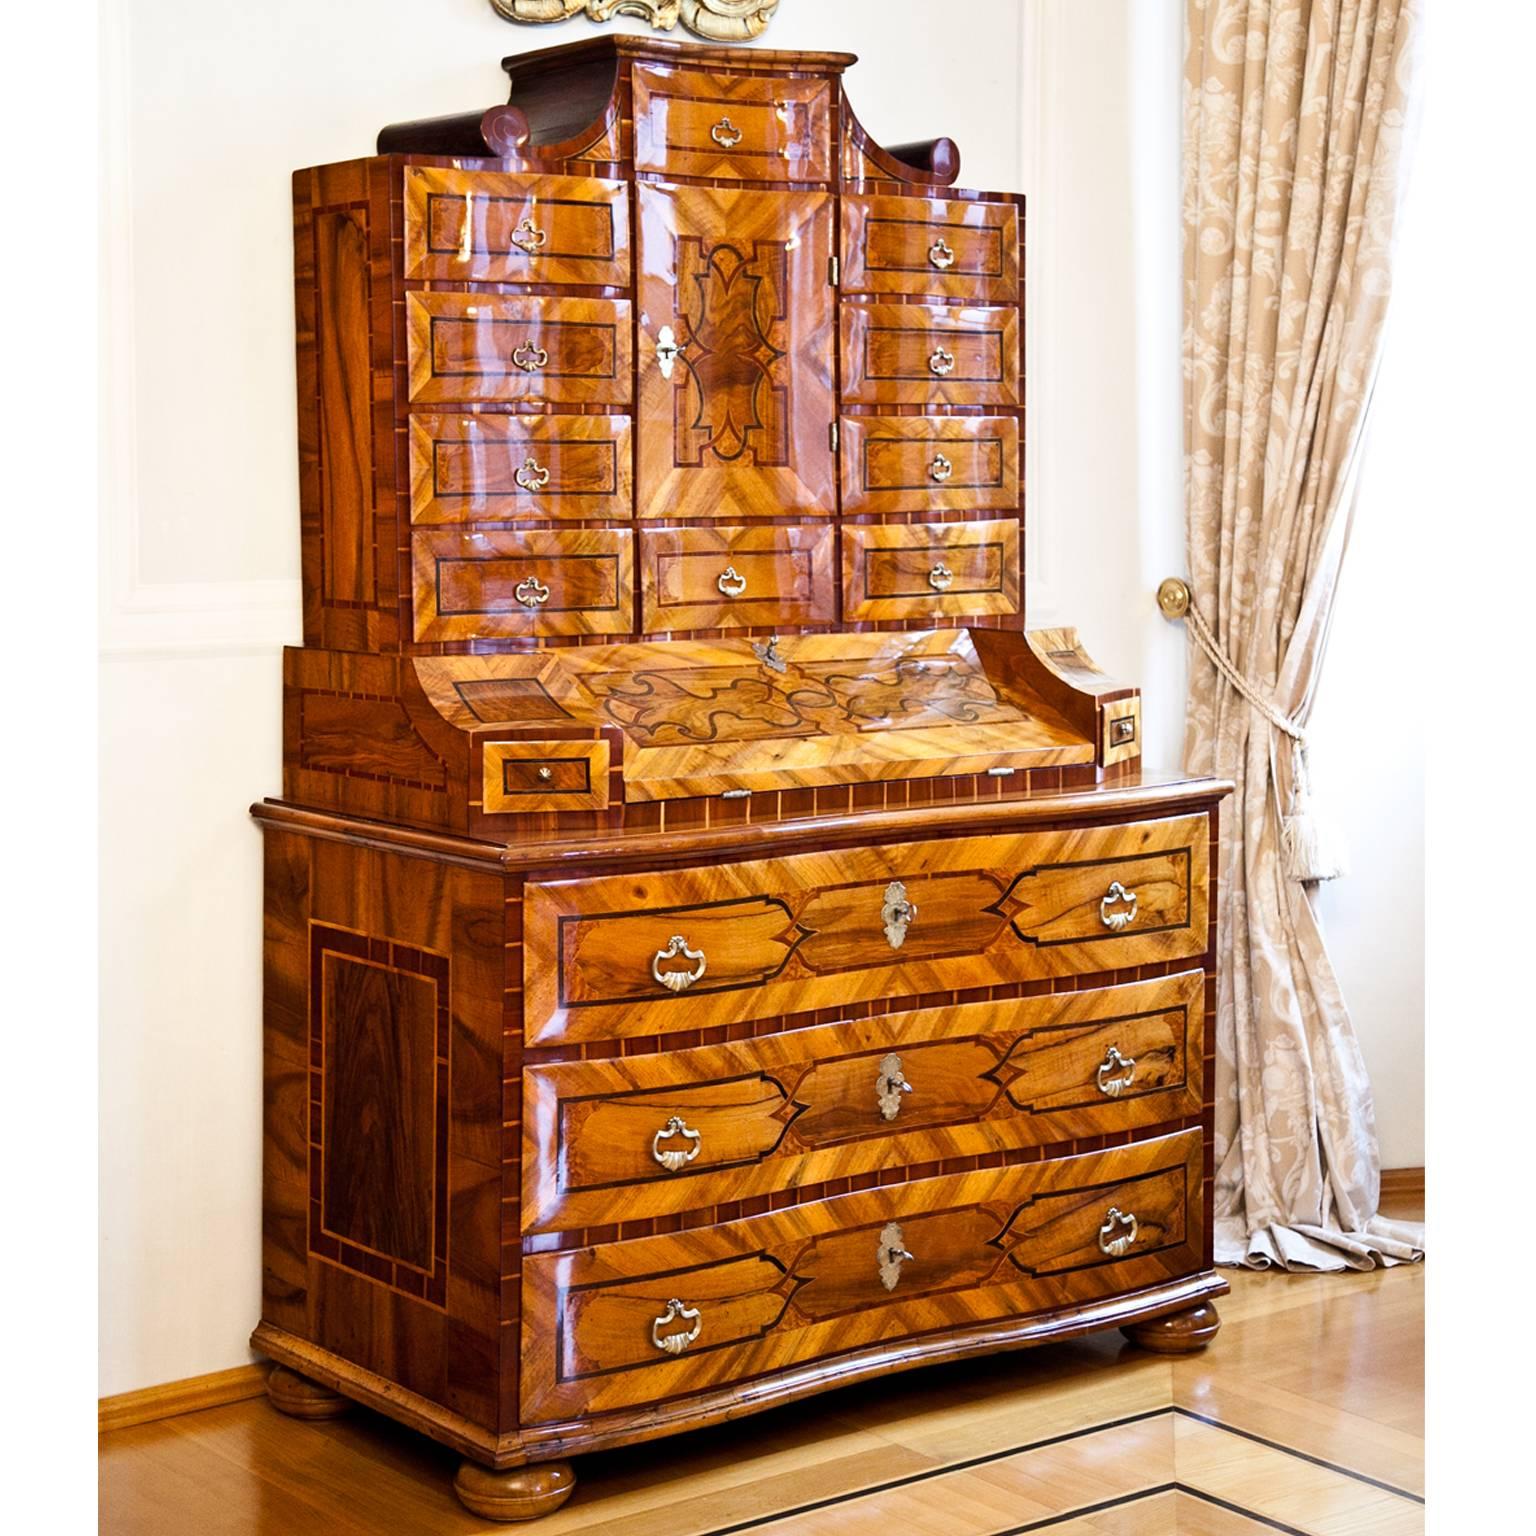 Fruitwood Baroque Tabernacle Secretaire, 18th Century